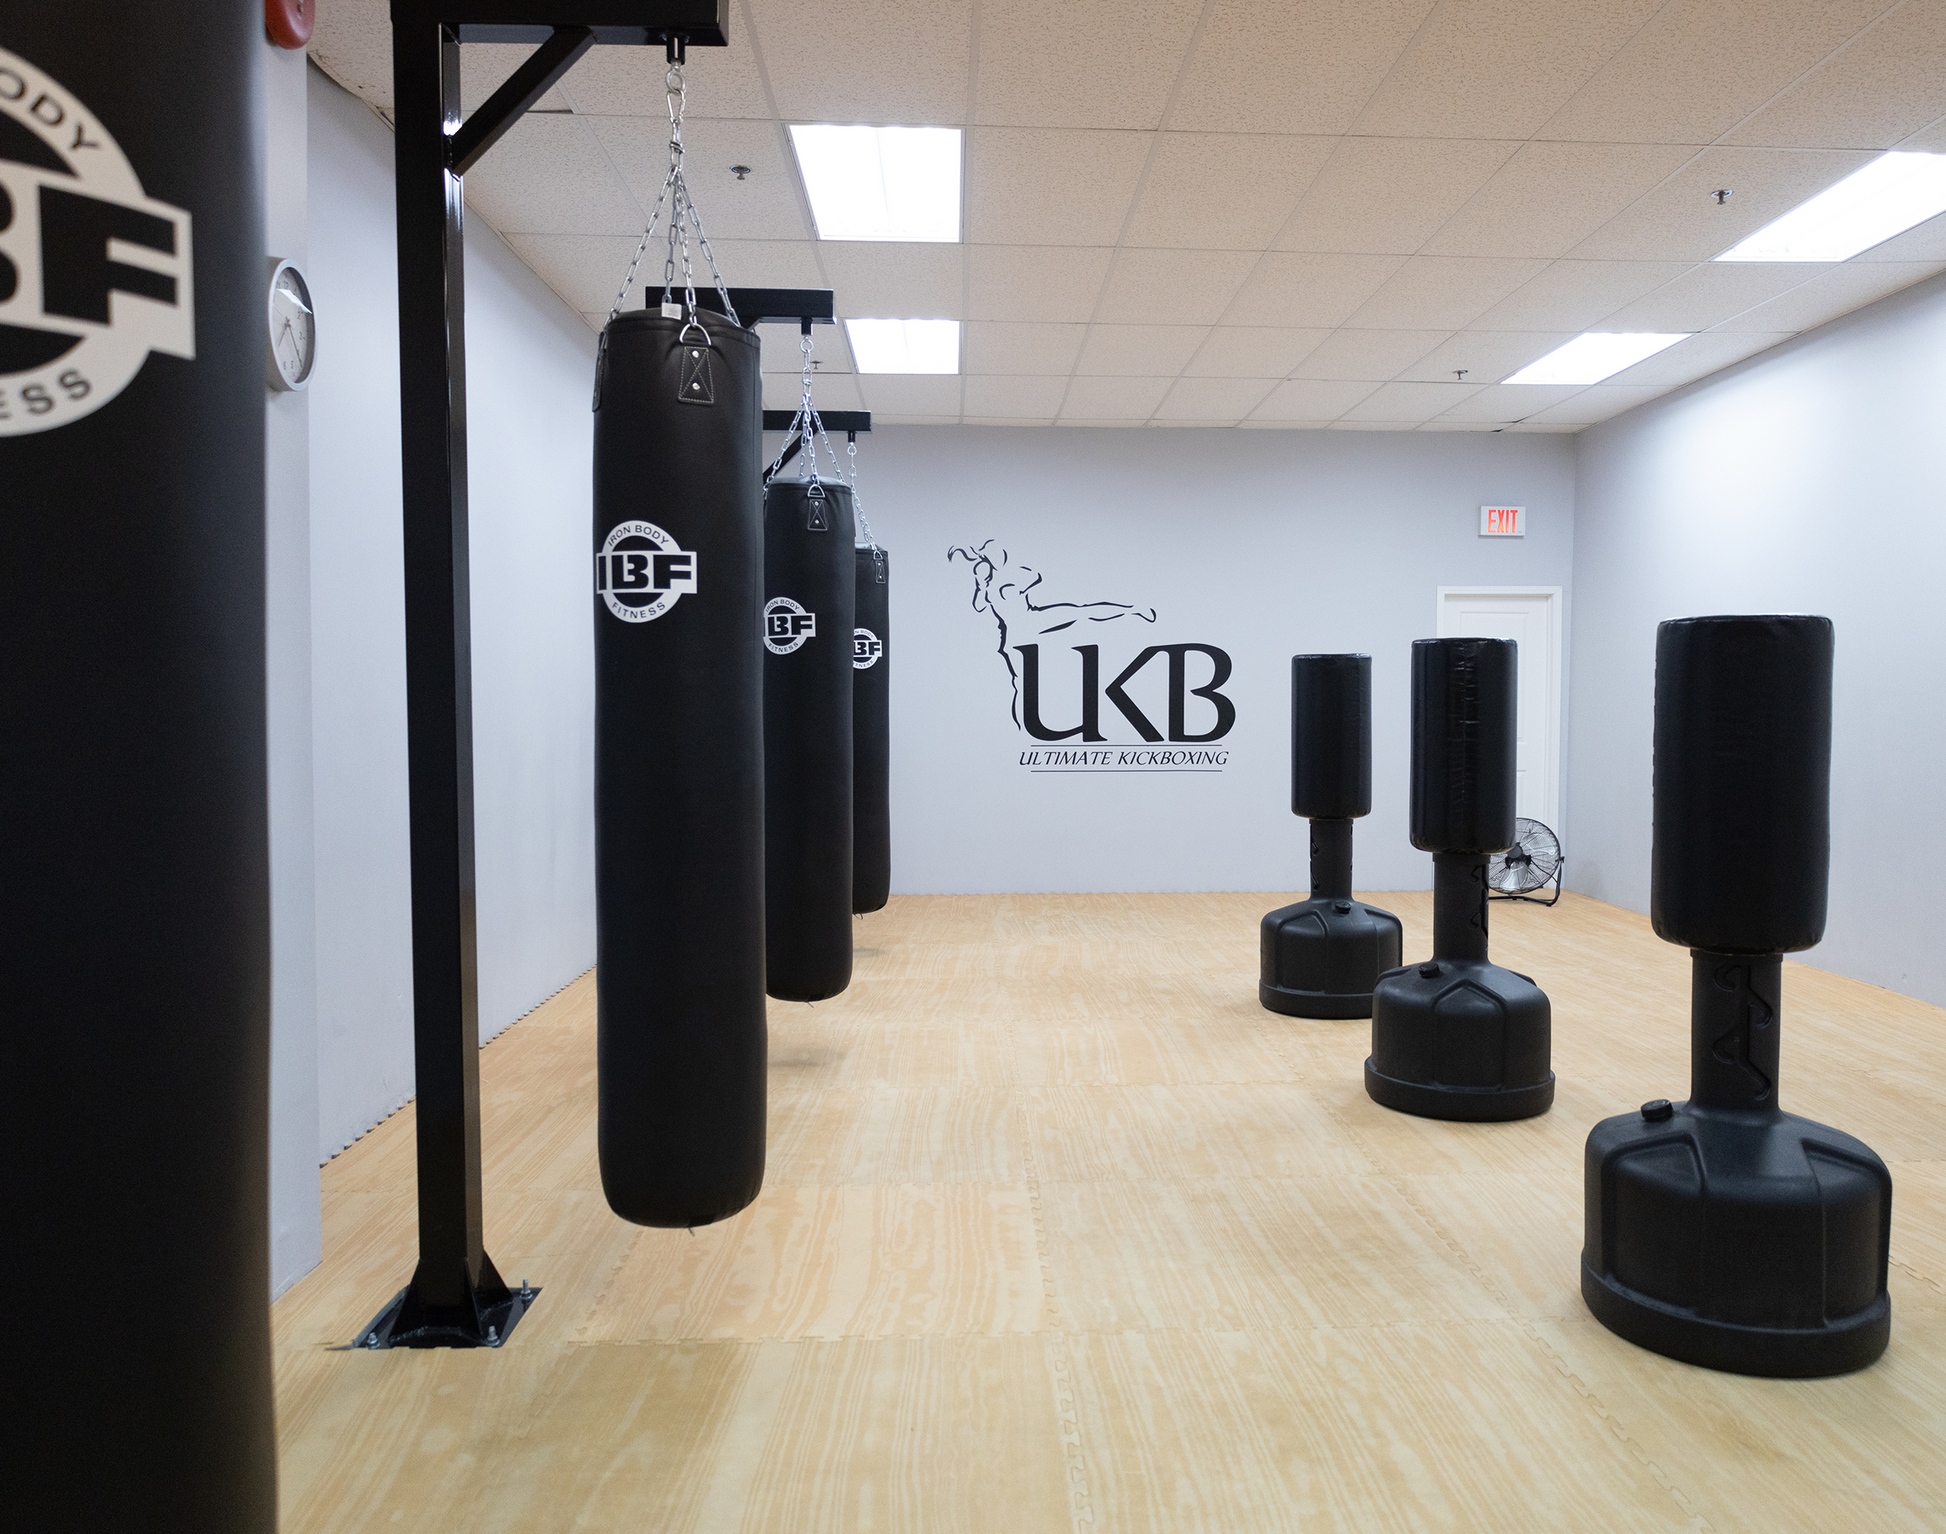 Another image of women's gym area at Ultimate Martial Arts & Fitness Muay Thai and kickboxing gym in Mississauga, Ontario, Canada